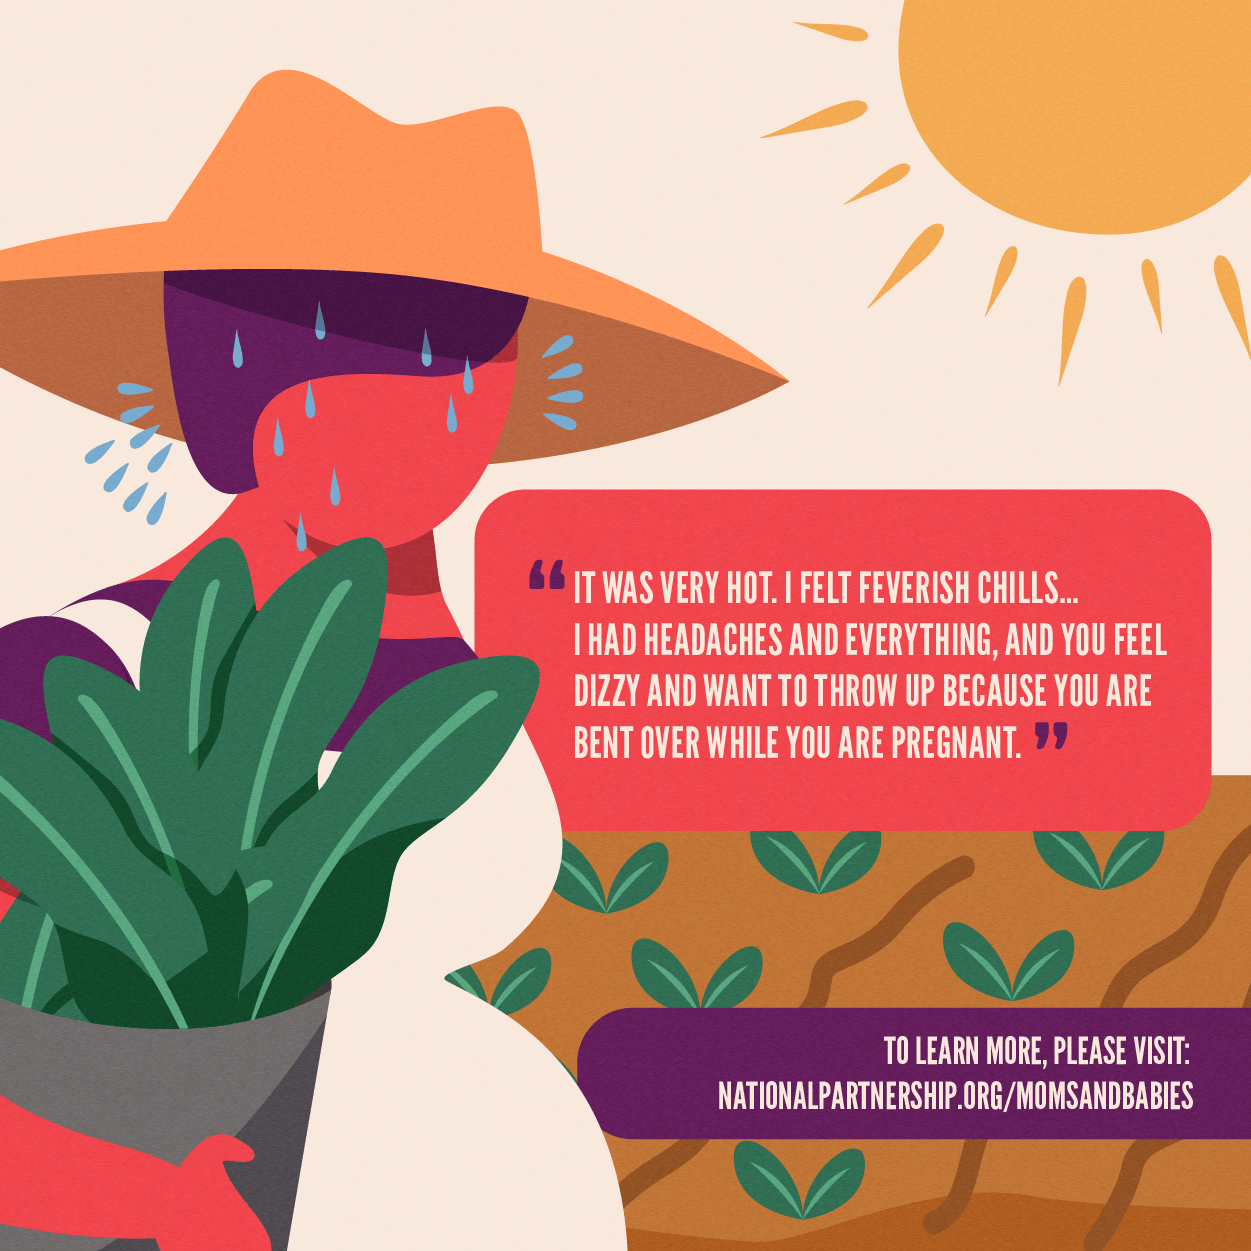 Illustration of a pregnant woman farm worker. The sun is very prominent in the background. She's wearing a brimmed hat, holding a bucket of vegetables. Her speech bubble reads: It was very hot. I felt feverish chills... I had headaches and everything, and you feel dizzy and want to throw up because you are bent over while you are pregnant.